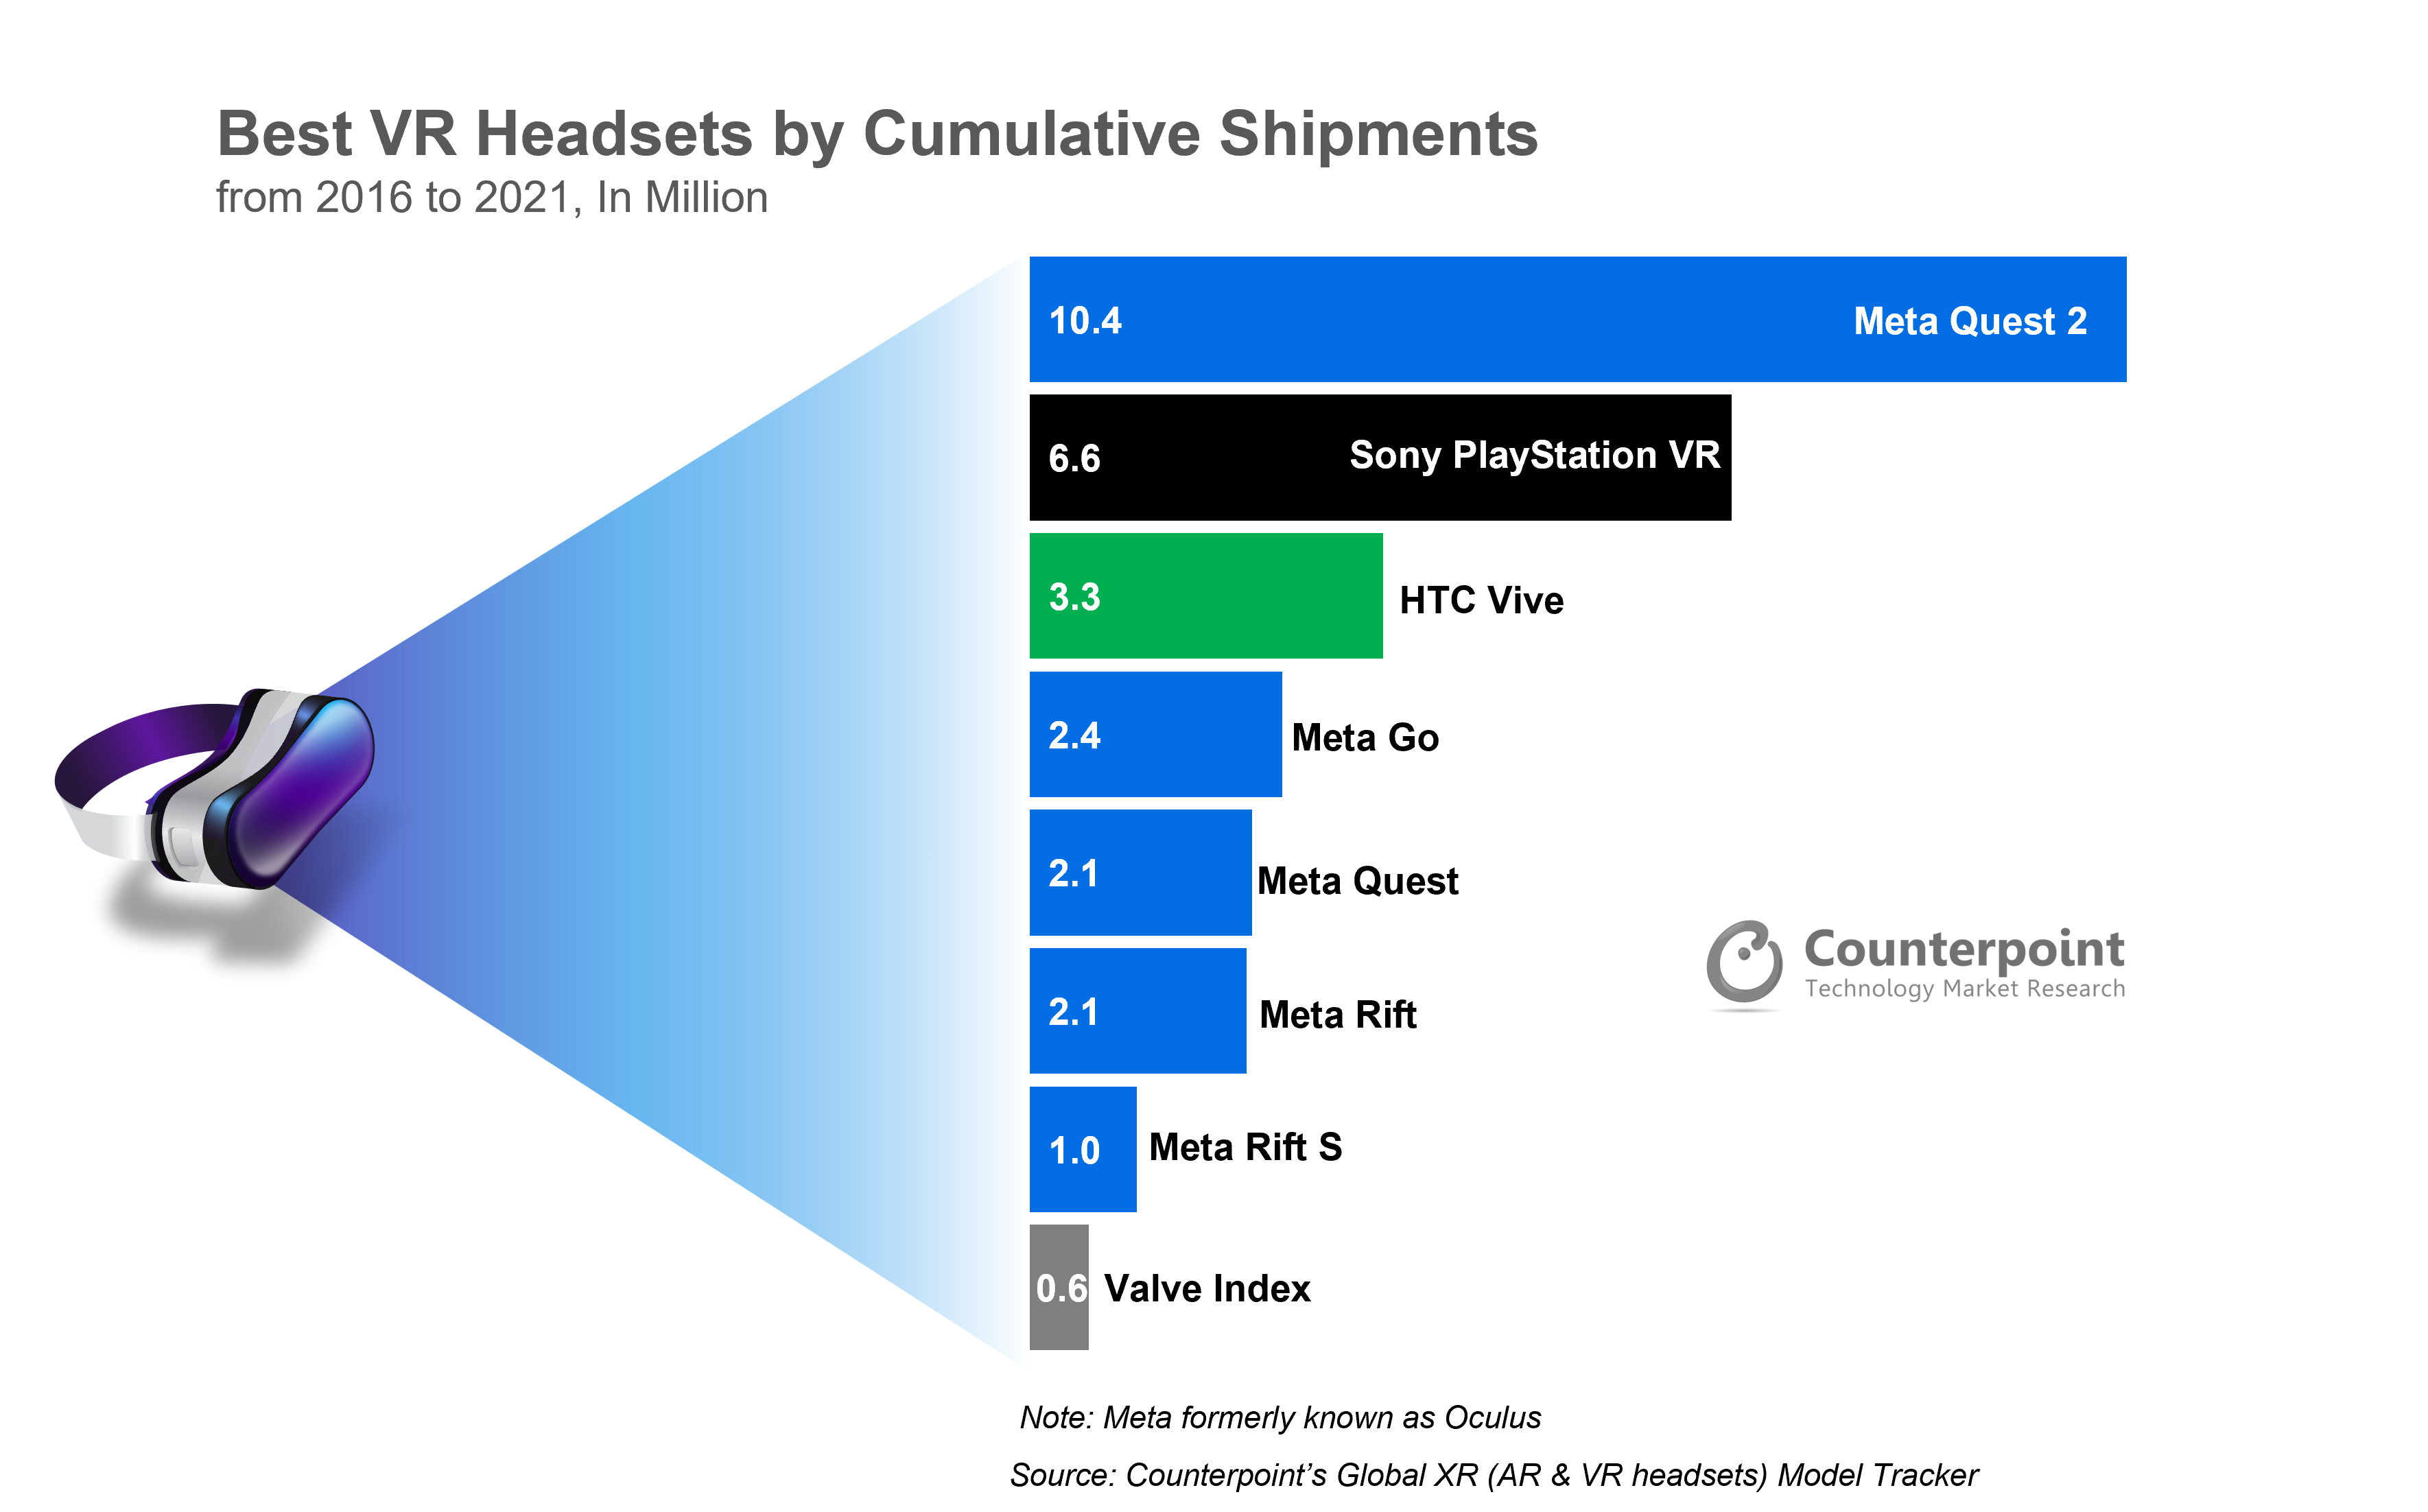 2 First VR Headset to Cross mn Shipments - Counterpoint Research